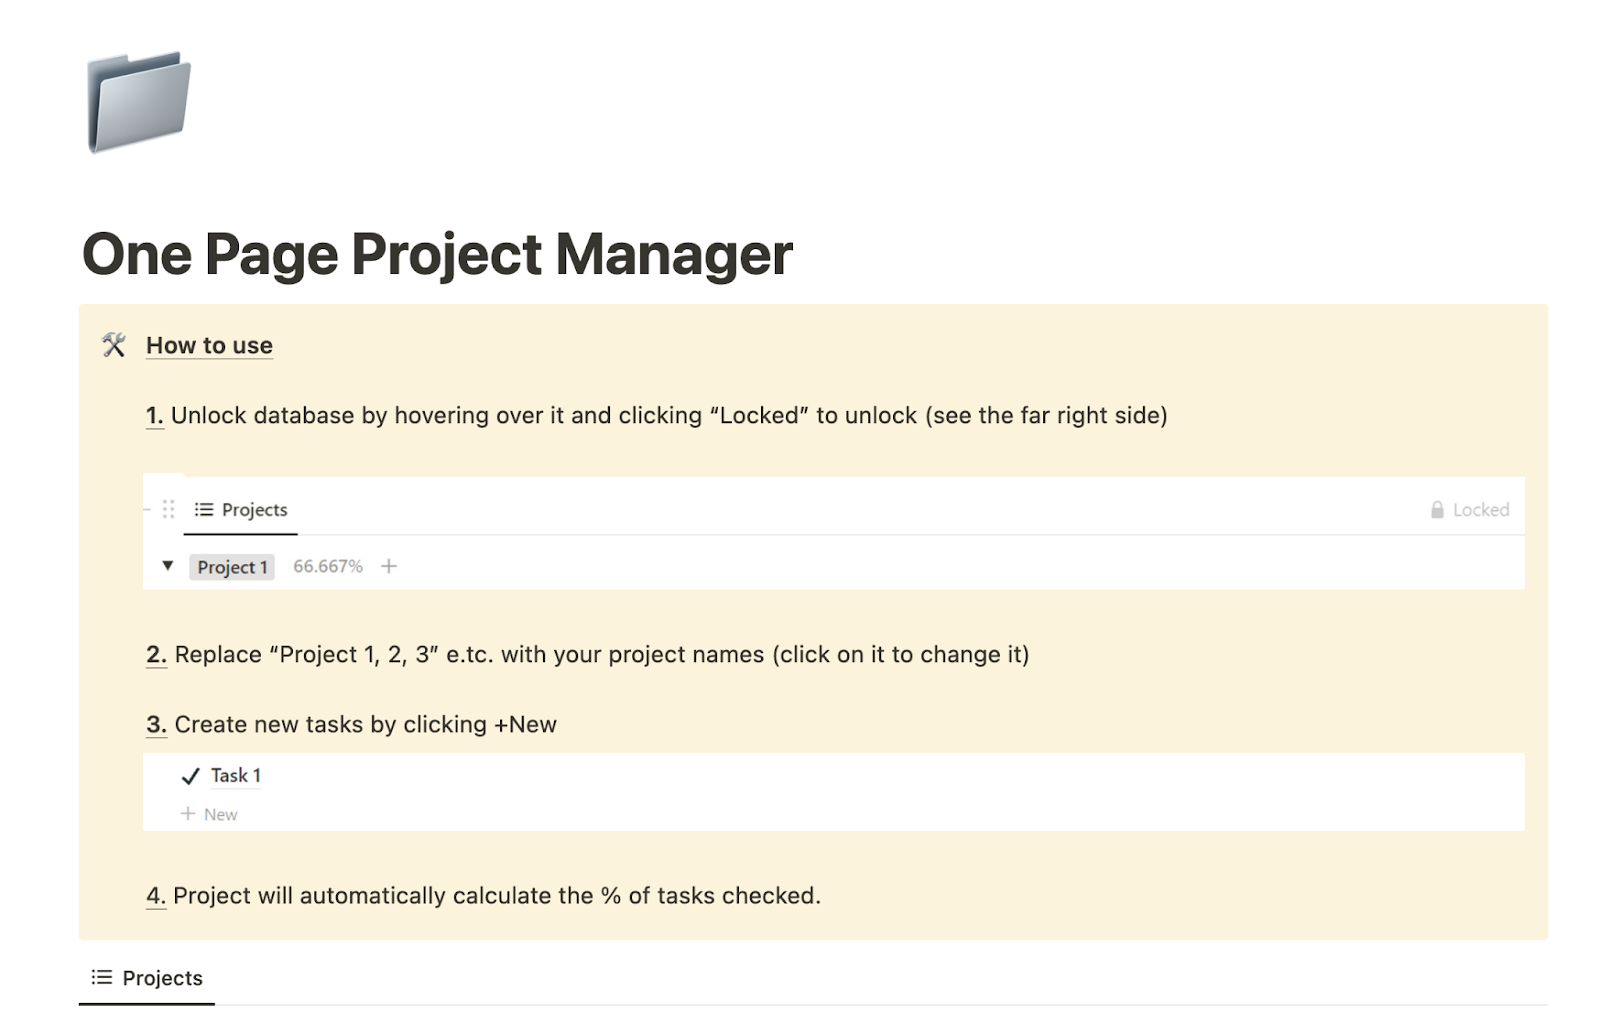 One-page project manager